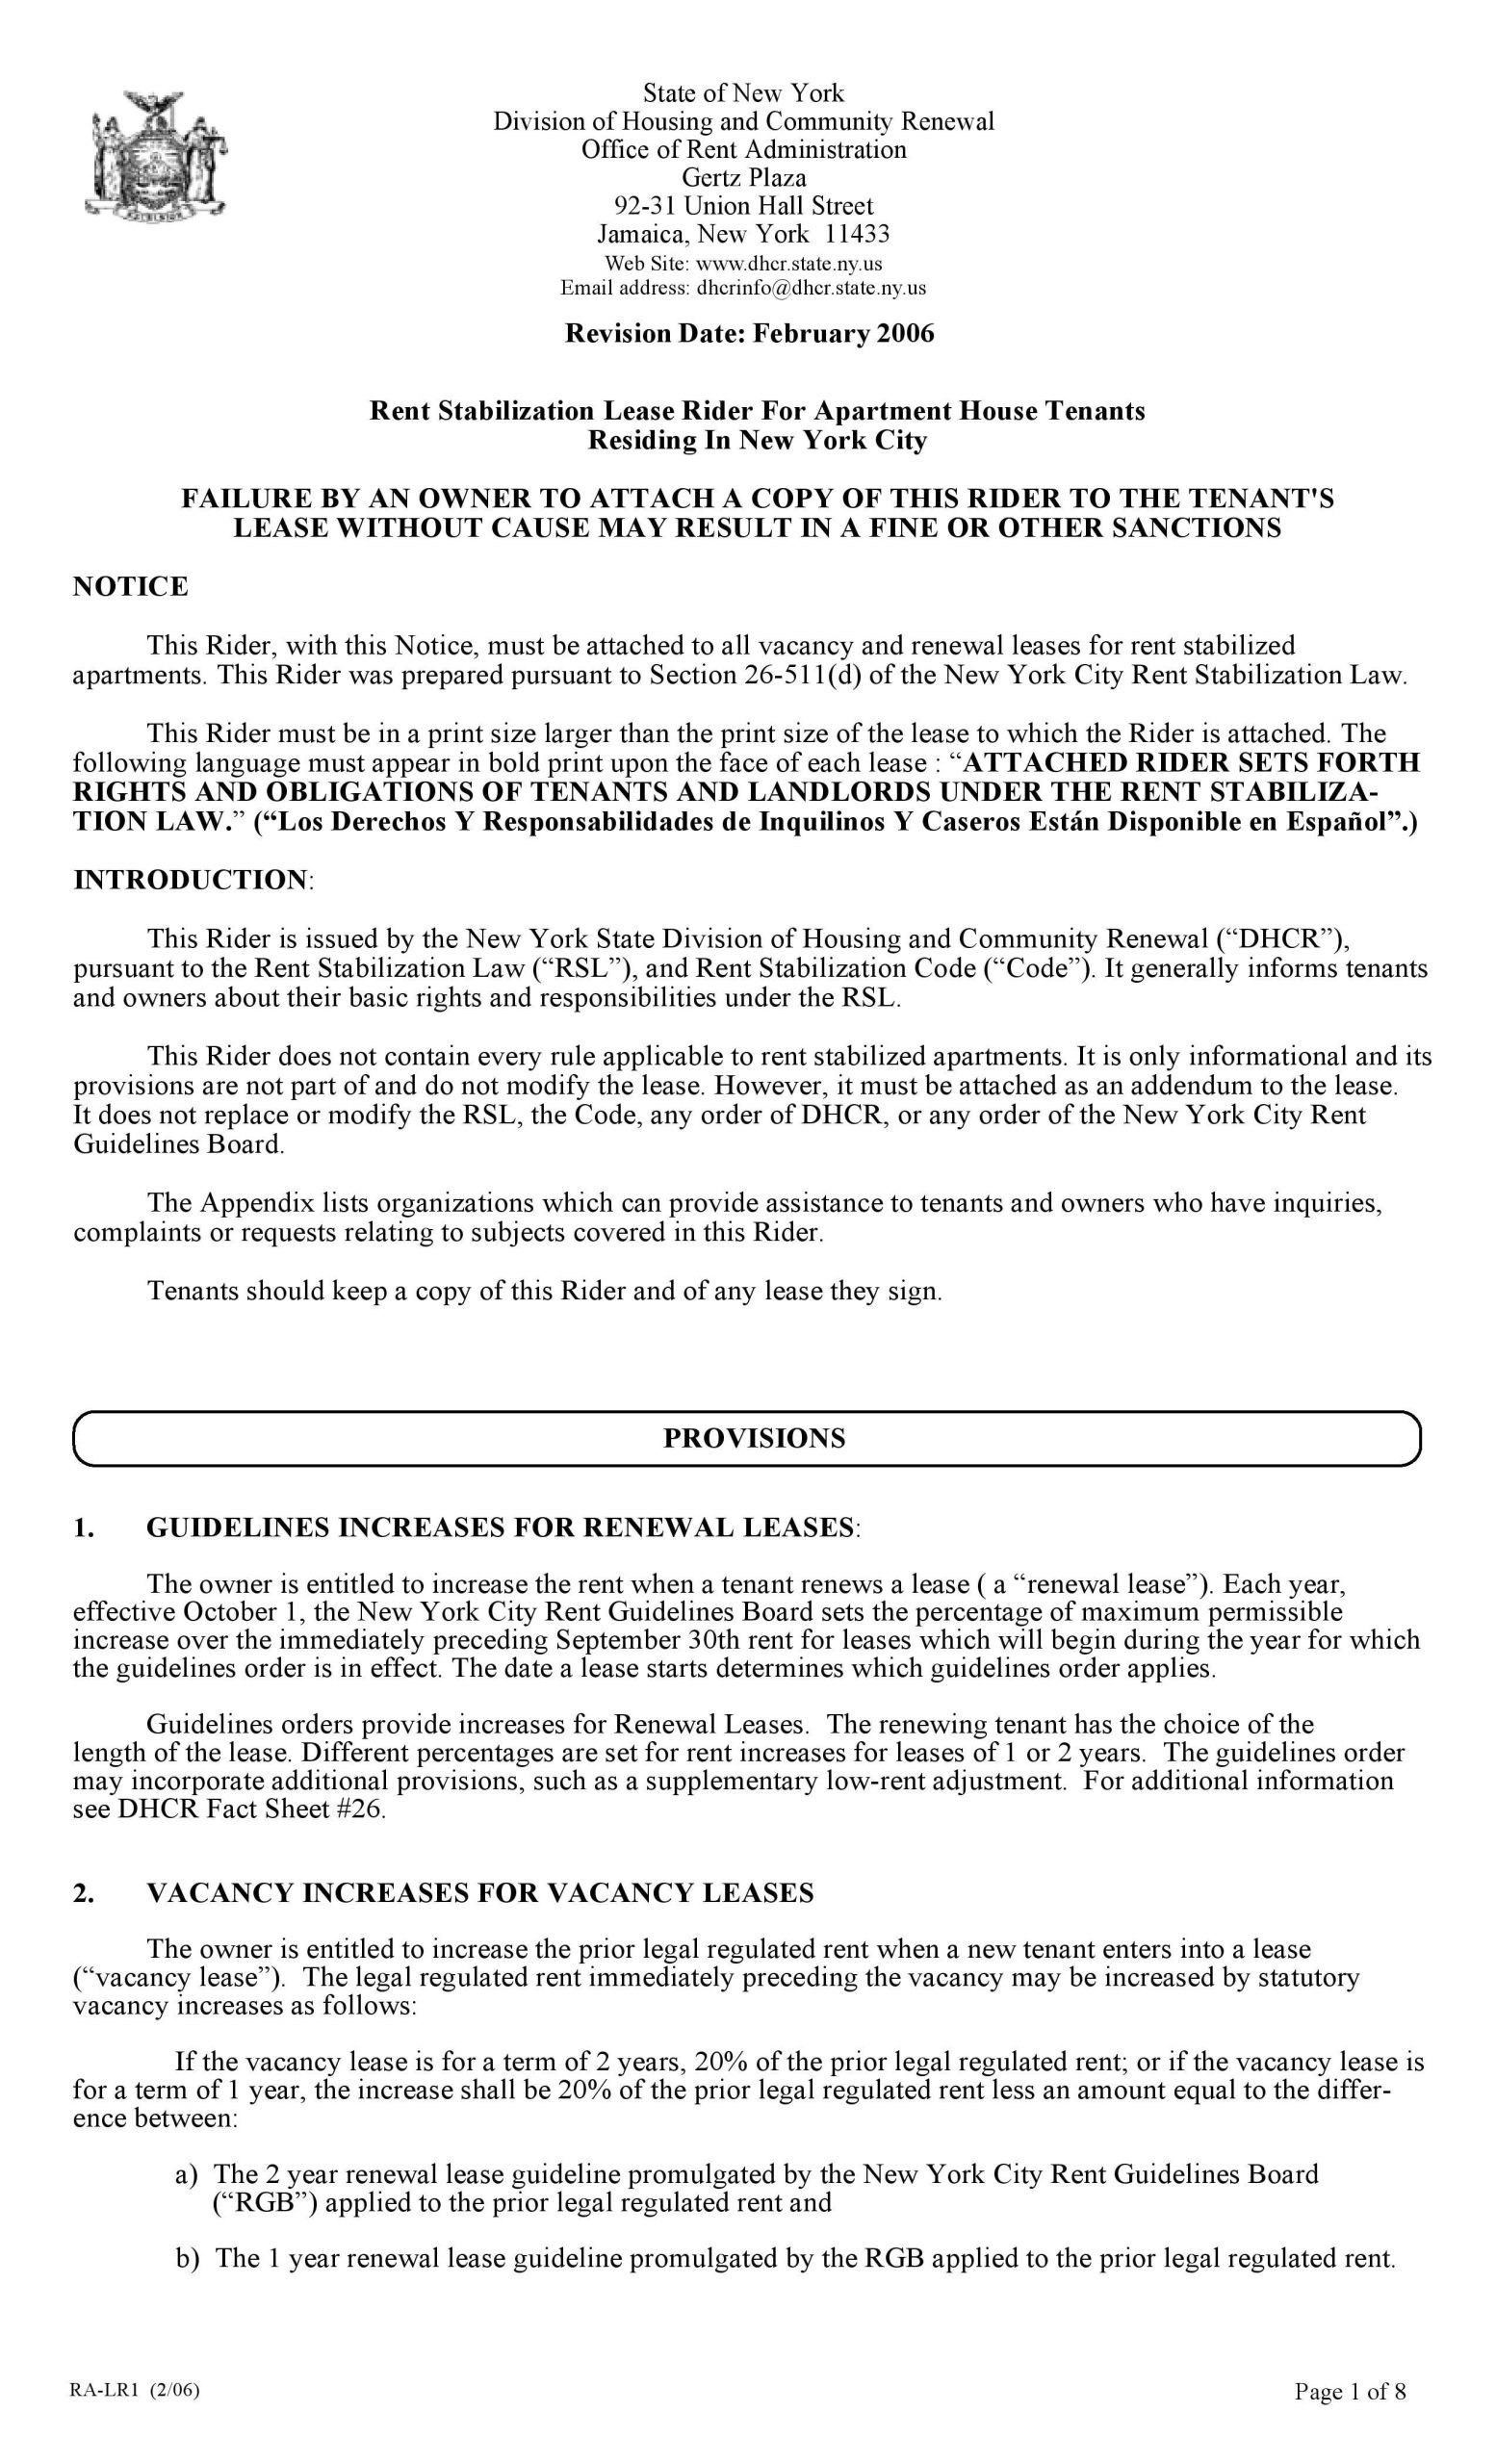 New York City Lease Rider For Rent Stabilized Tenants - RA-LR1 Form